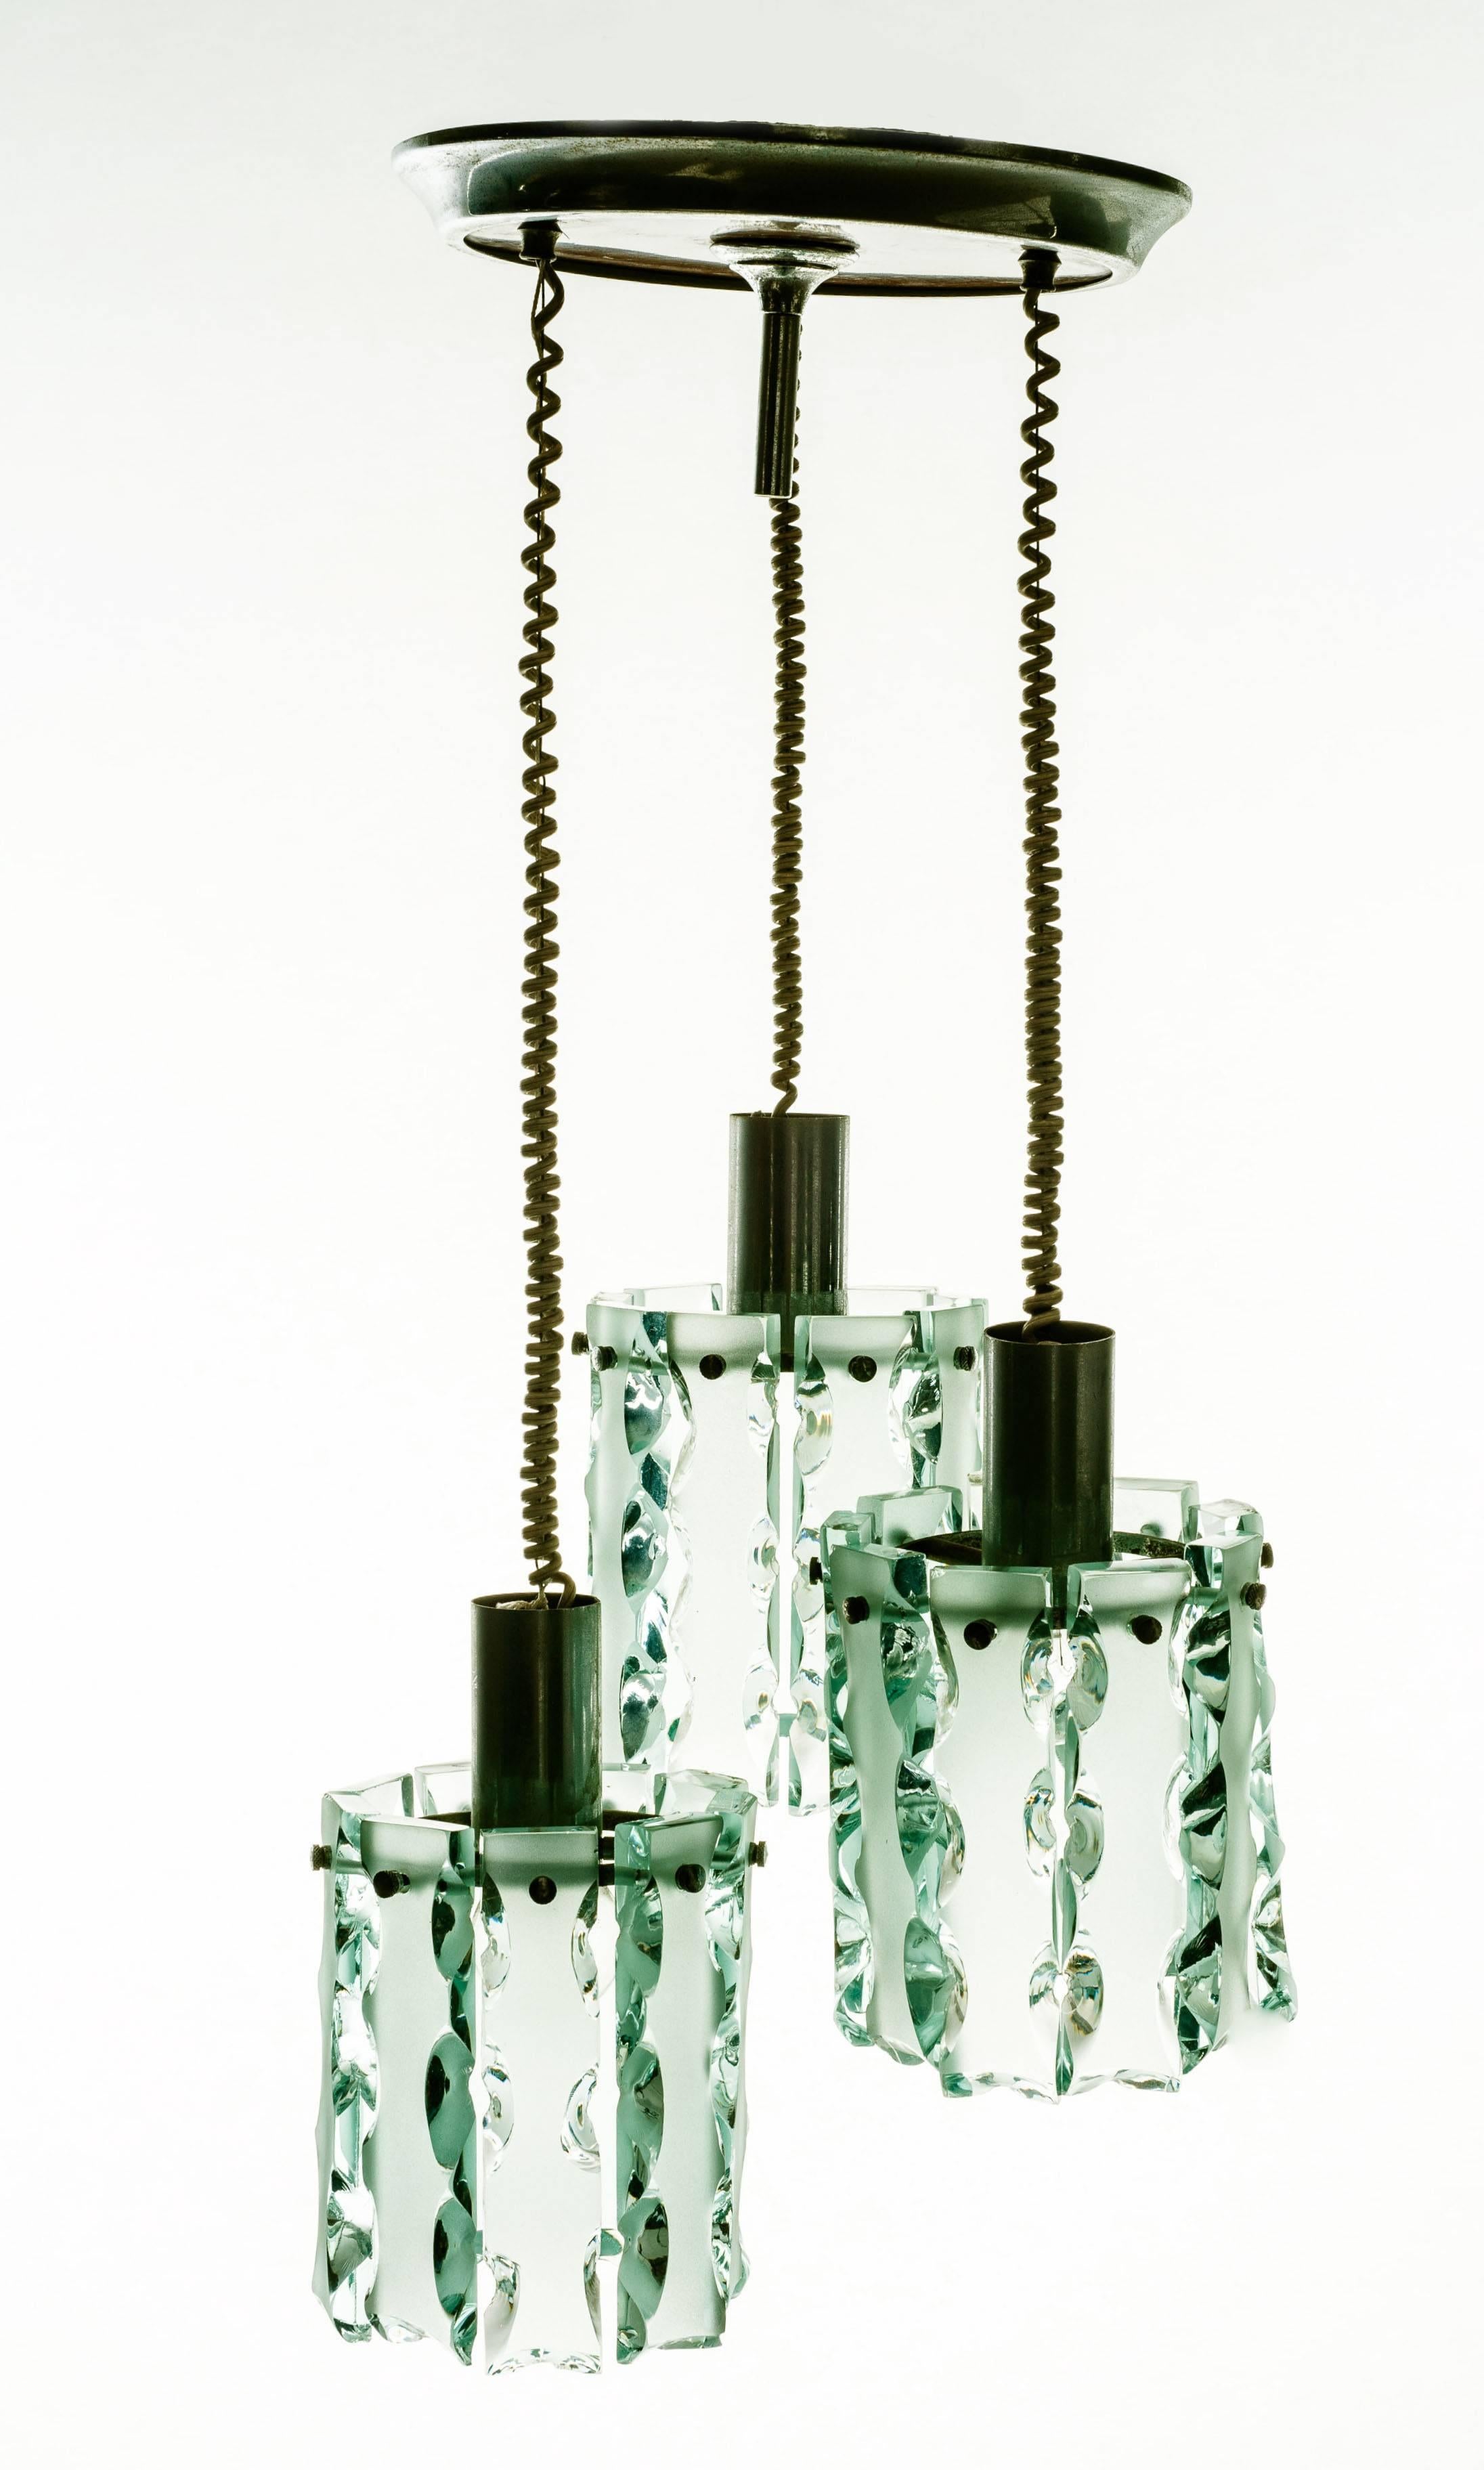 Elegant trio of lights. 24 glasses blades with chipped edges in Verde Nilo Color. The glasses of each group are 20 cm high and have a diameter of 15 cm.